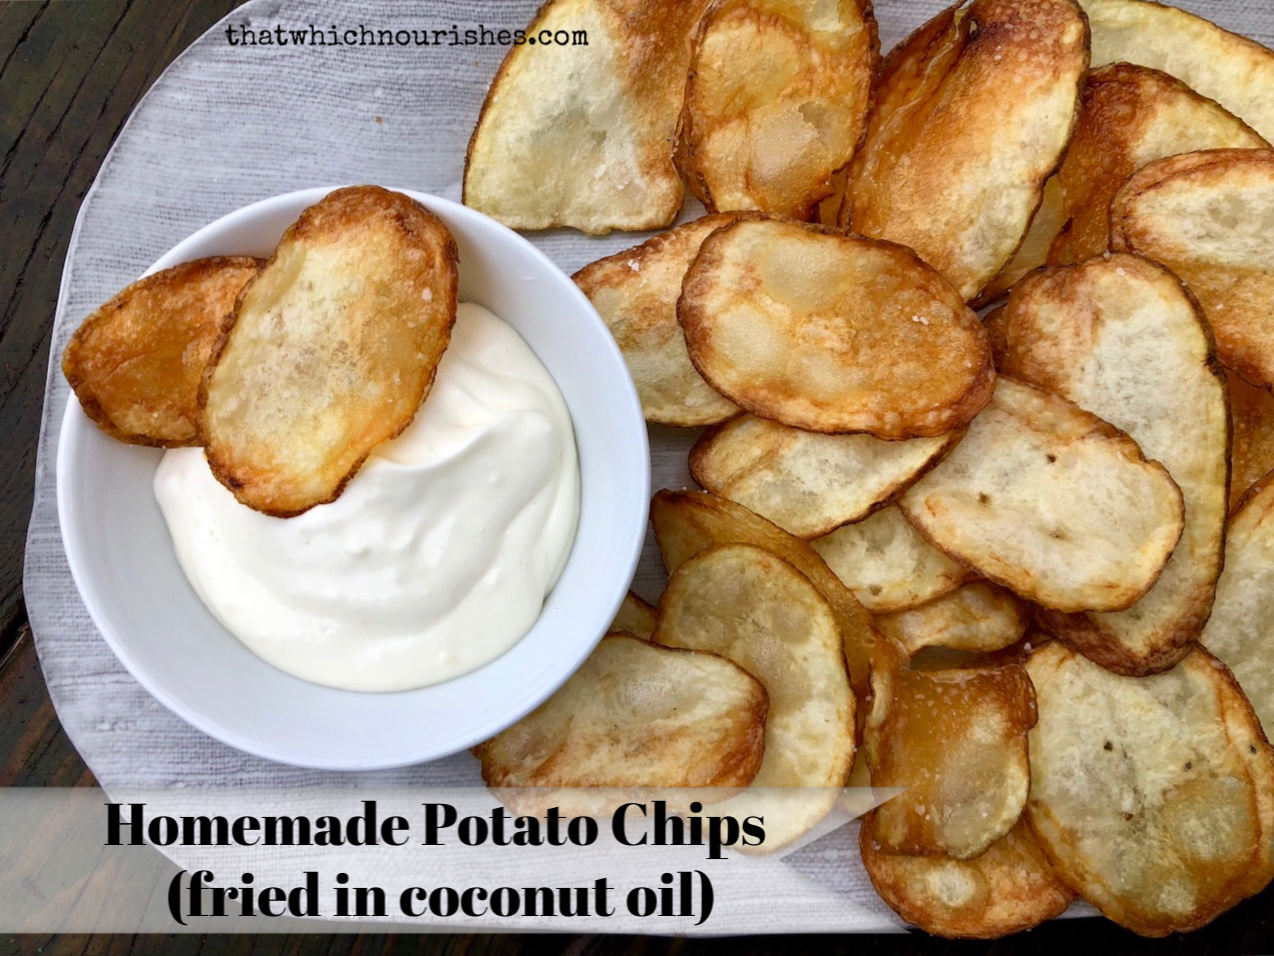 Homemade Potato Chips fried in coconut oil -- There's never been a better potato chip than the warm and salted one fresh from the fryer made in coconut oil. | thatwhichnourishes.com